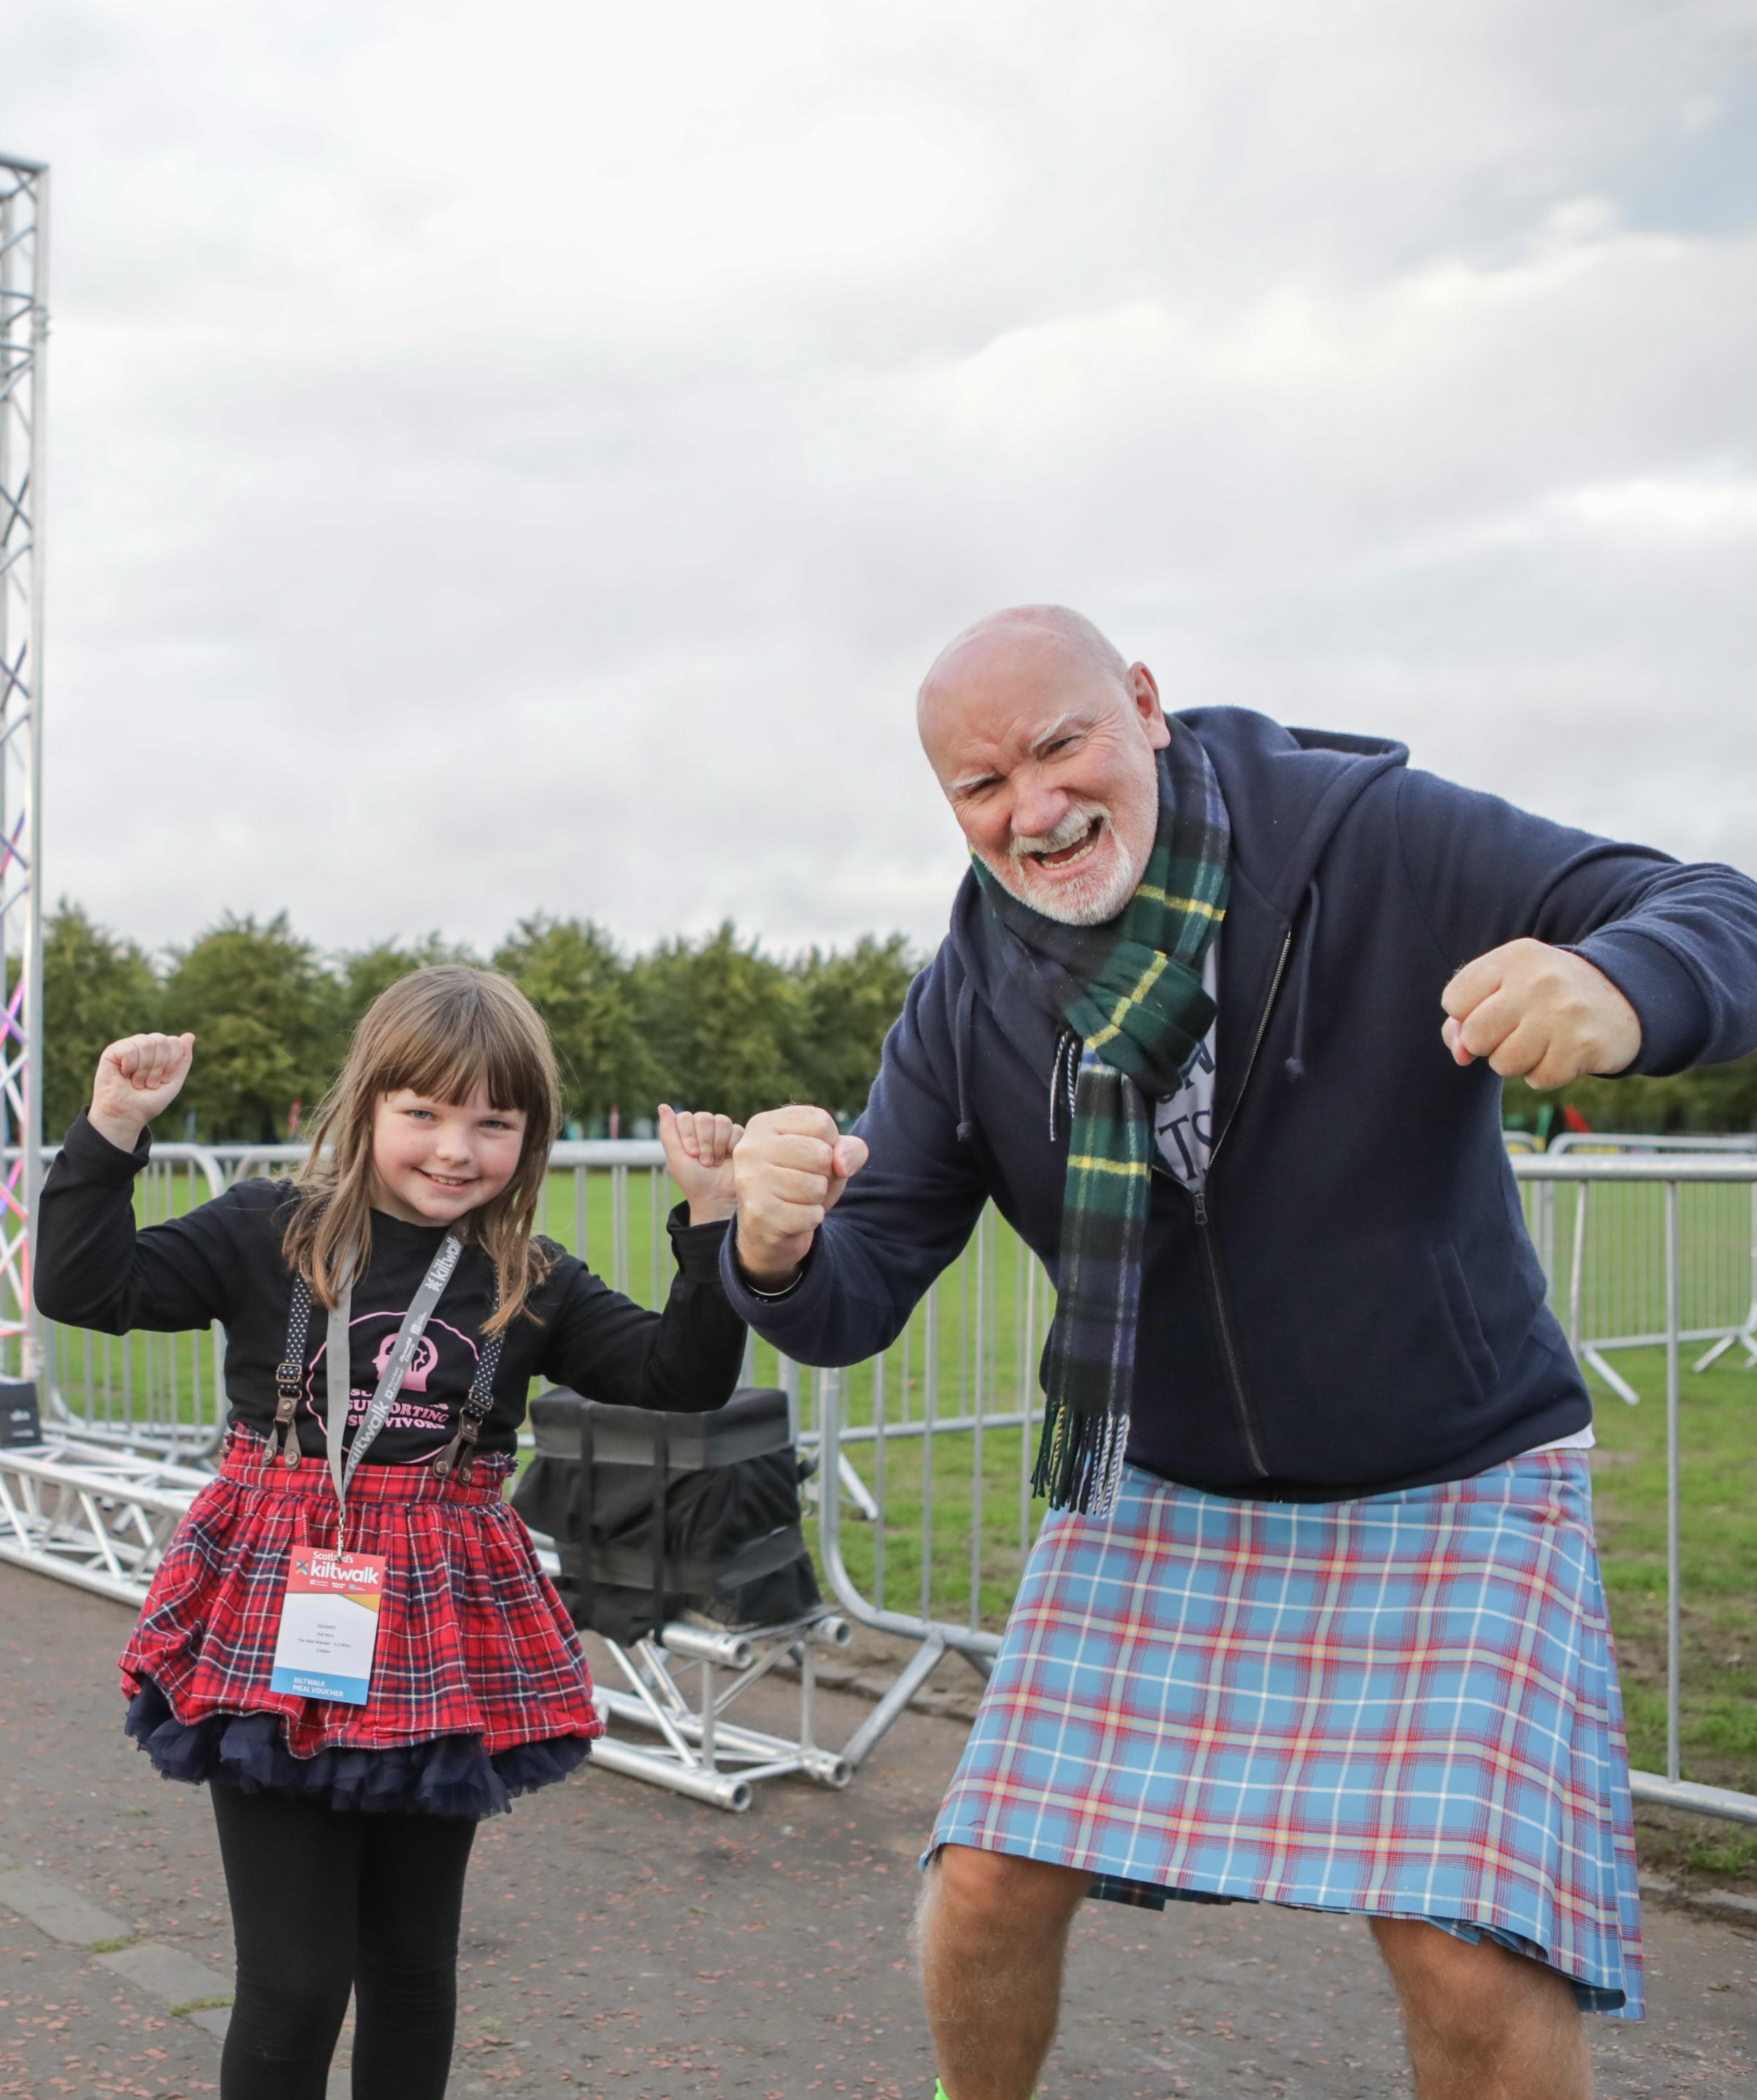 Sir Tom Hunter at a previous Glasgow event